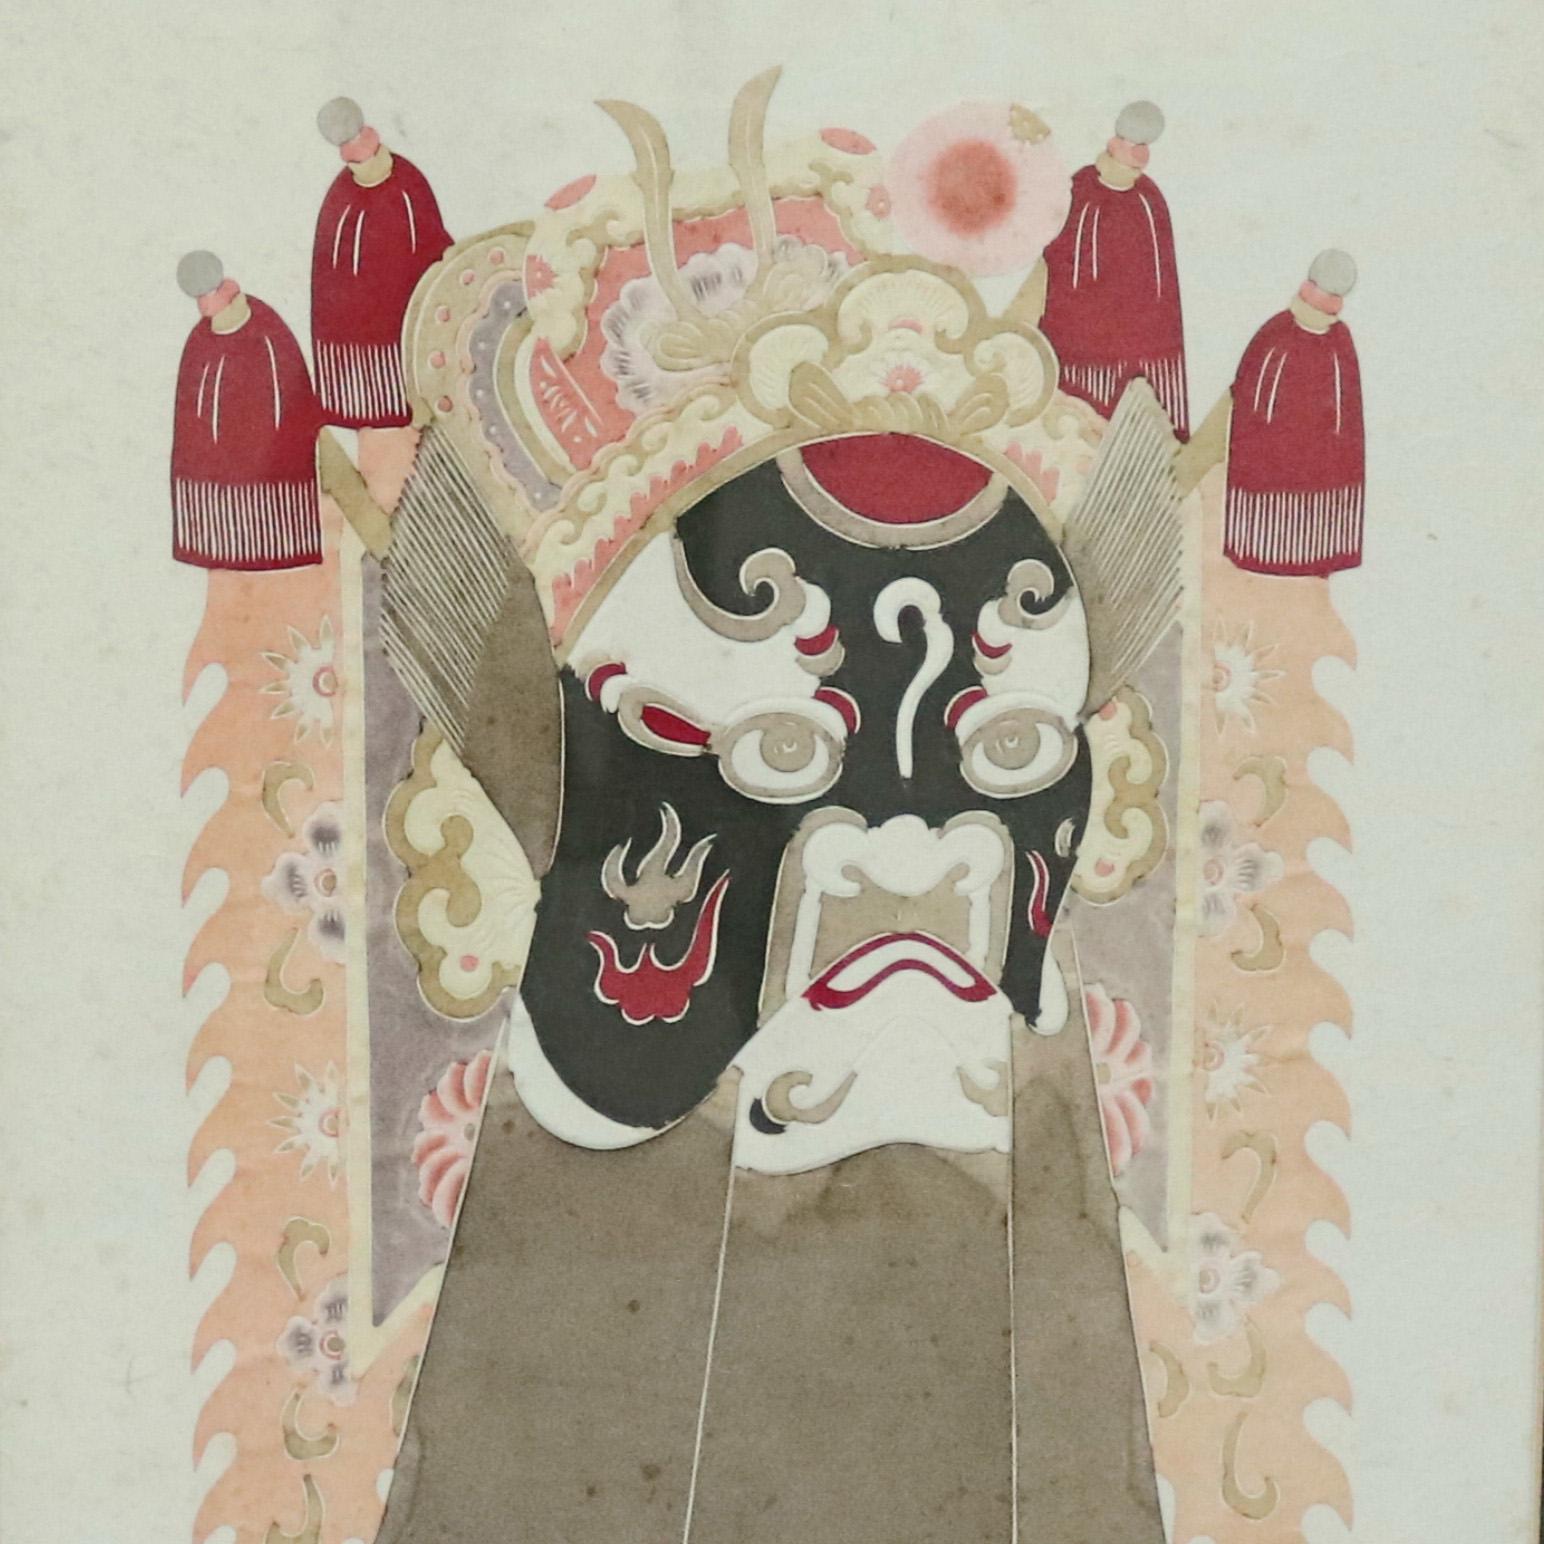 A Chinese framed print offers mixed media depiction of ceremonial deity mask, 20th century

Measures - 18